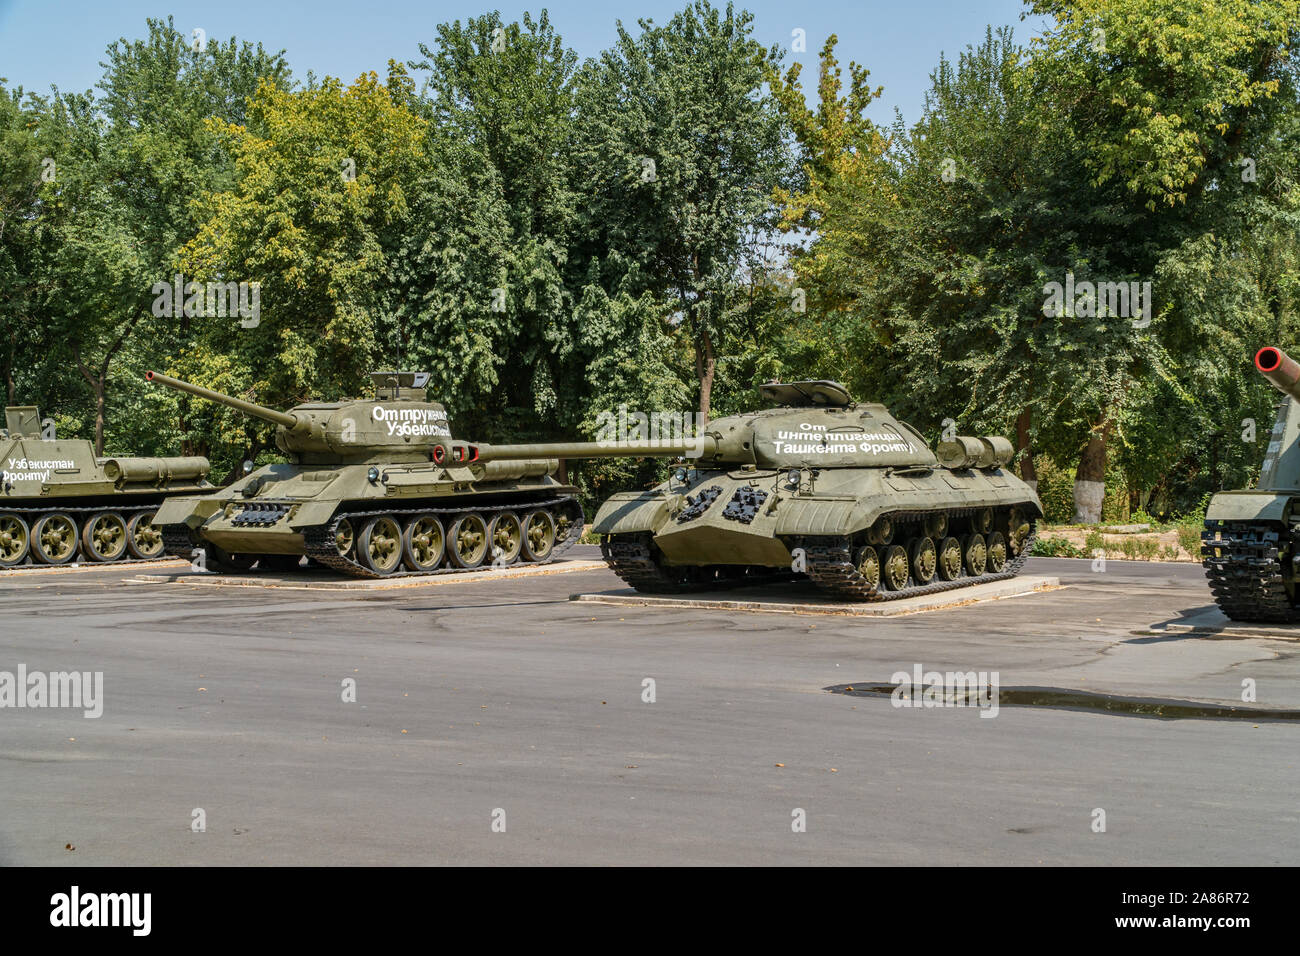 Tashkent, Uzbekistan - September 03, 2018: Old famous Soviet Union tanks - T34 and IS-3 that was used during WW2, outdoor military museum Stock Photo